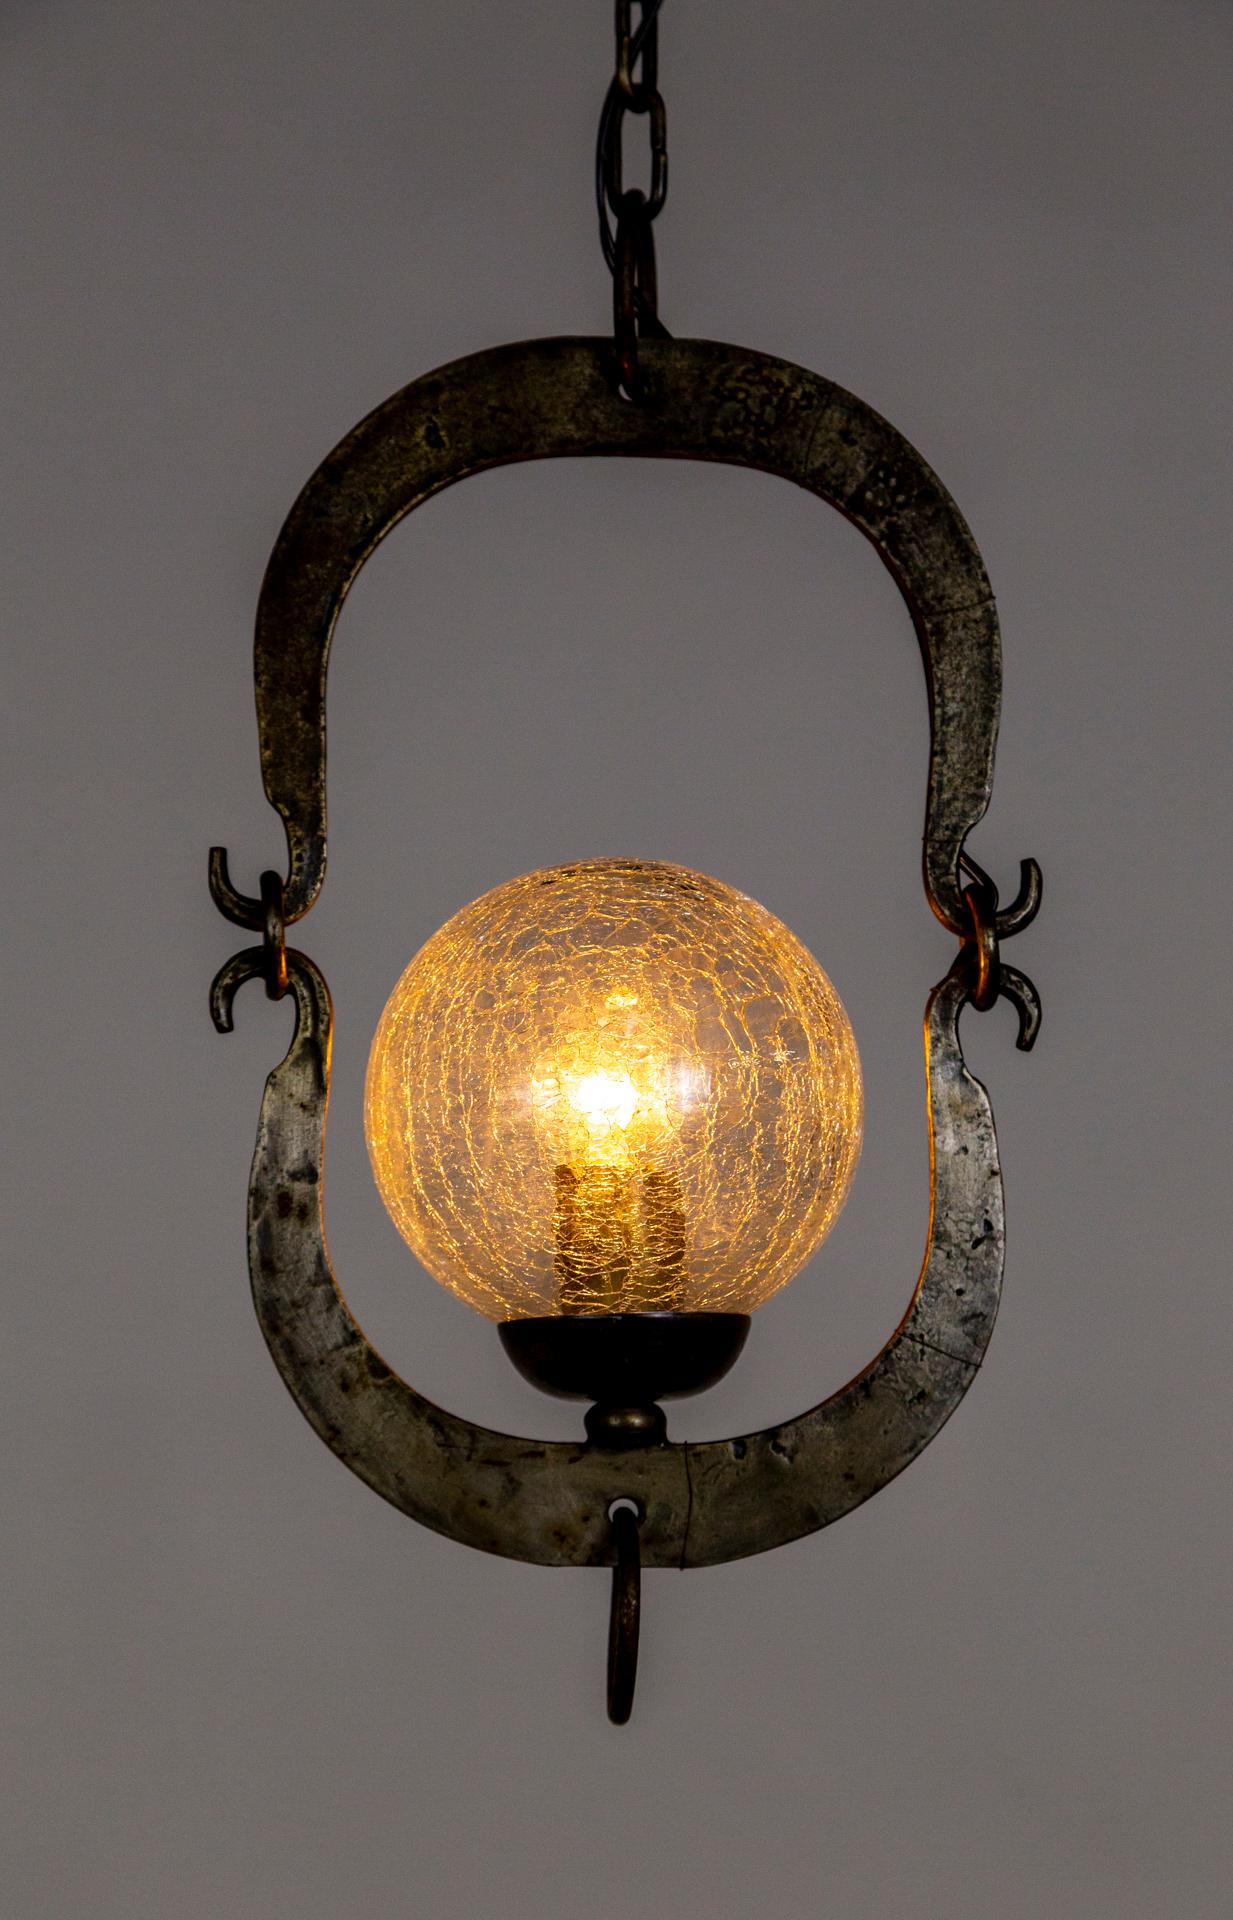 This unique, antique pendant light with custom, period glass, has a timeless look. The aged, forged metal has a lovely patina and hand-made texture; in an understated, elegant design with a hanging ring detail. The 